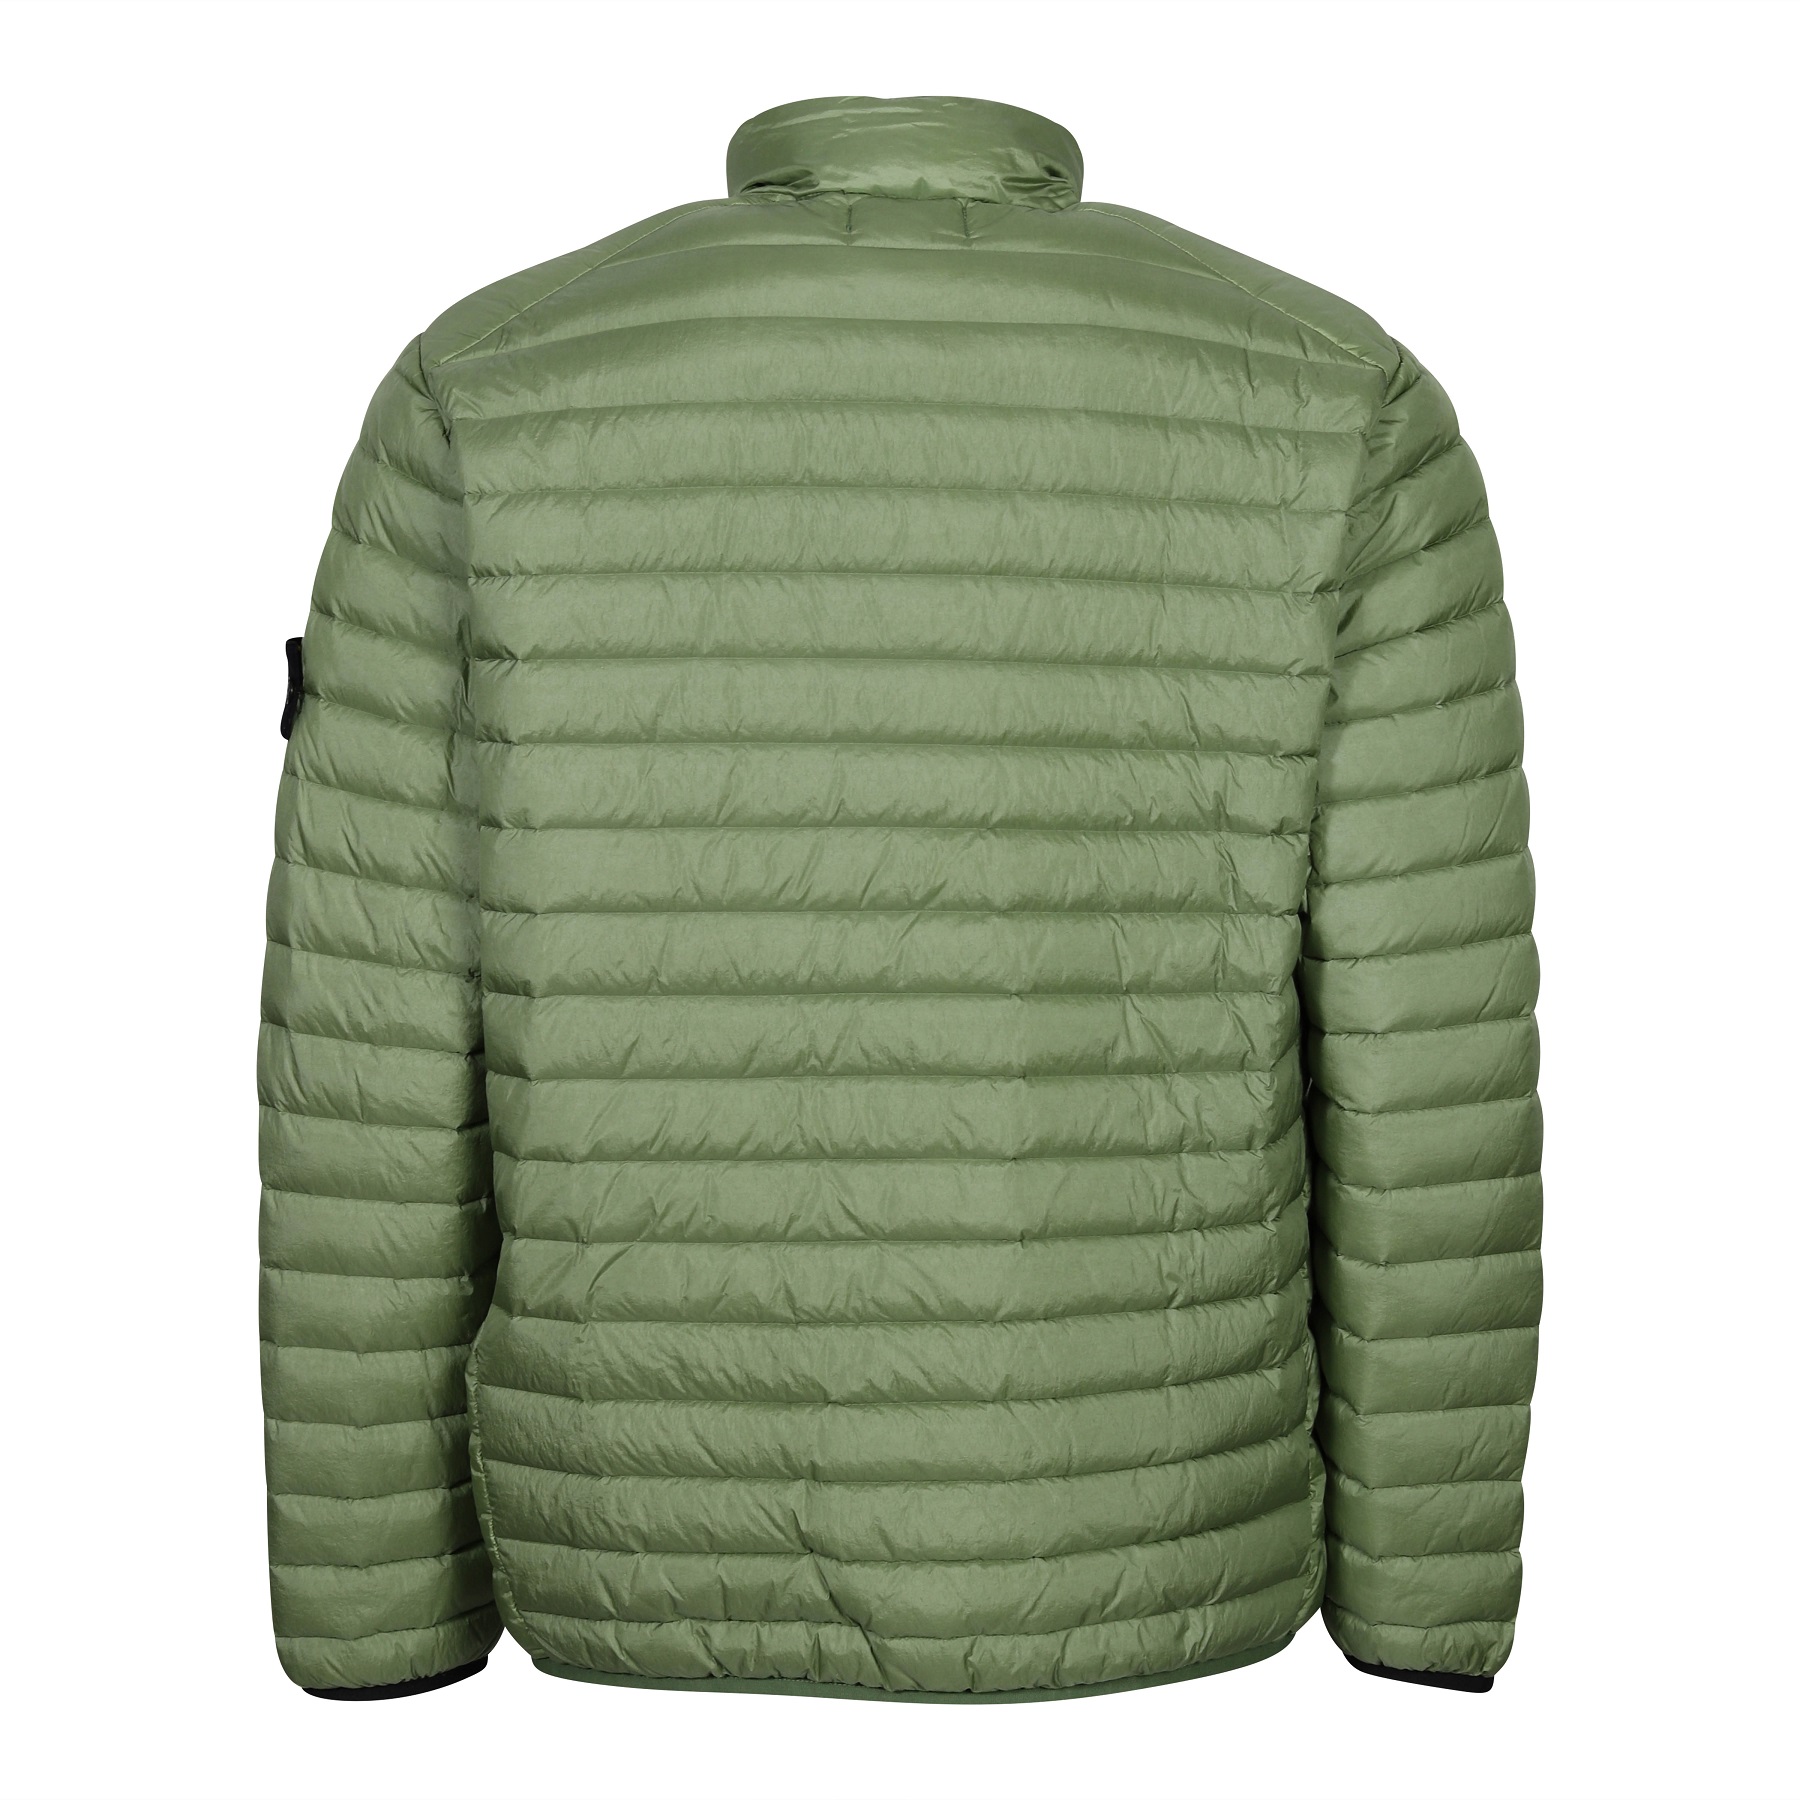 Stone Island Real Down Jacket in Sage